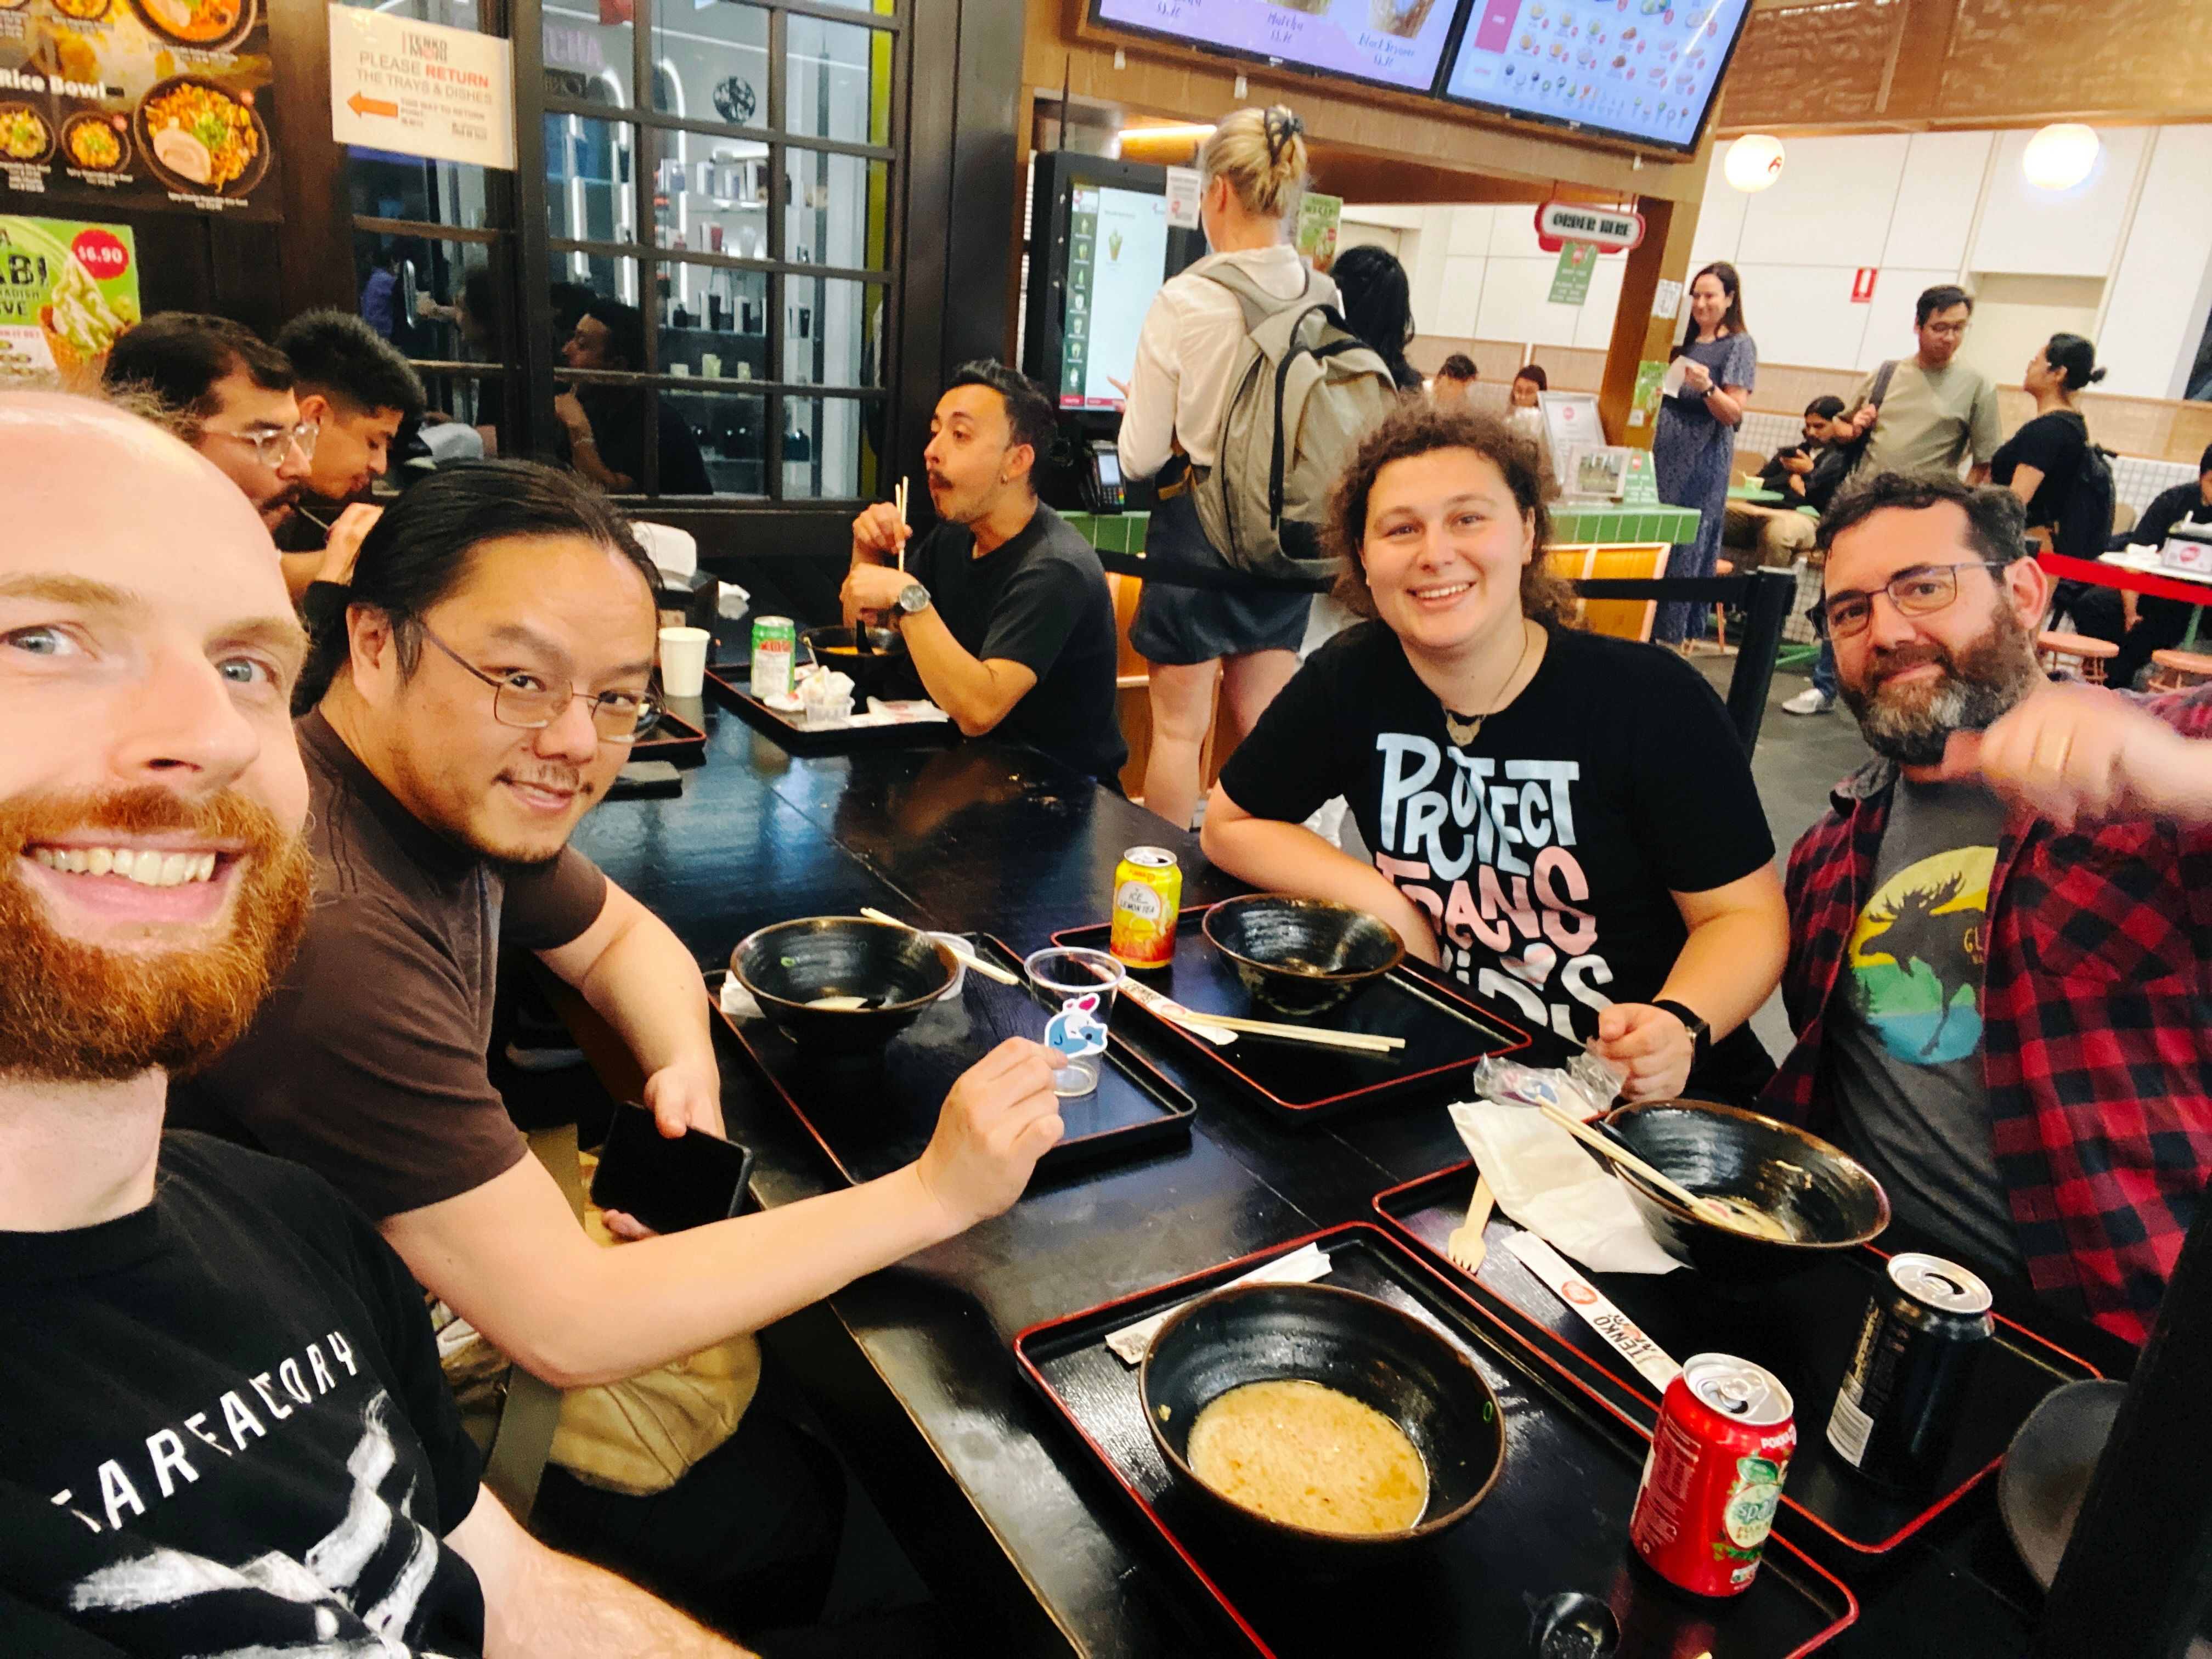 A photo of four people looking at the camera and smiling. They're sitting around a table with empty ramen bowls in it.